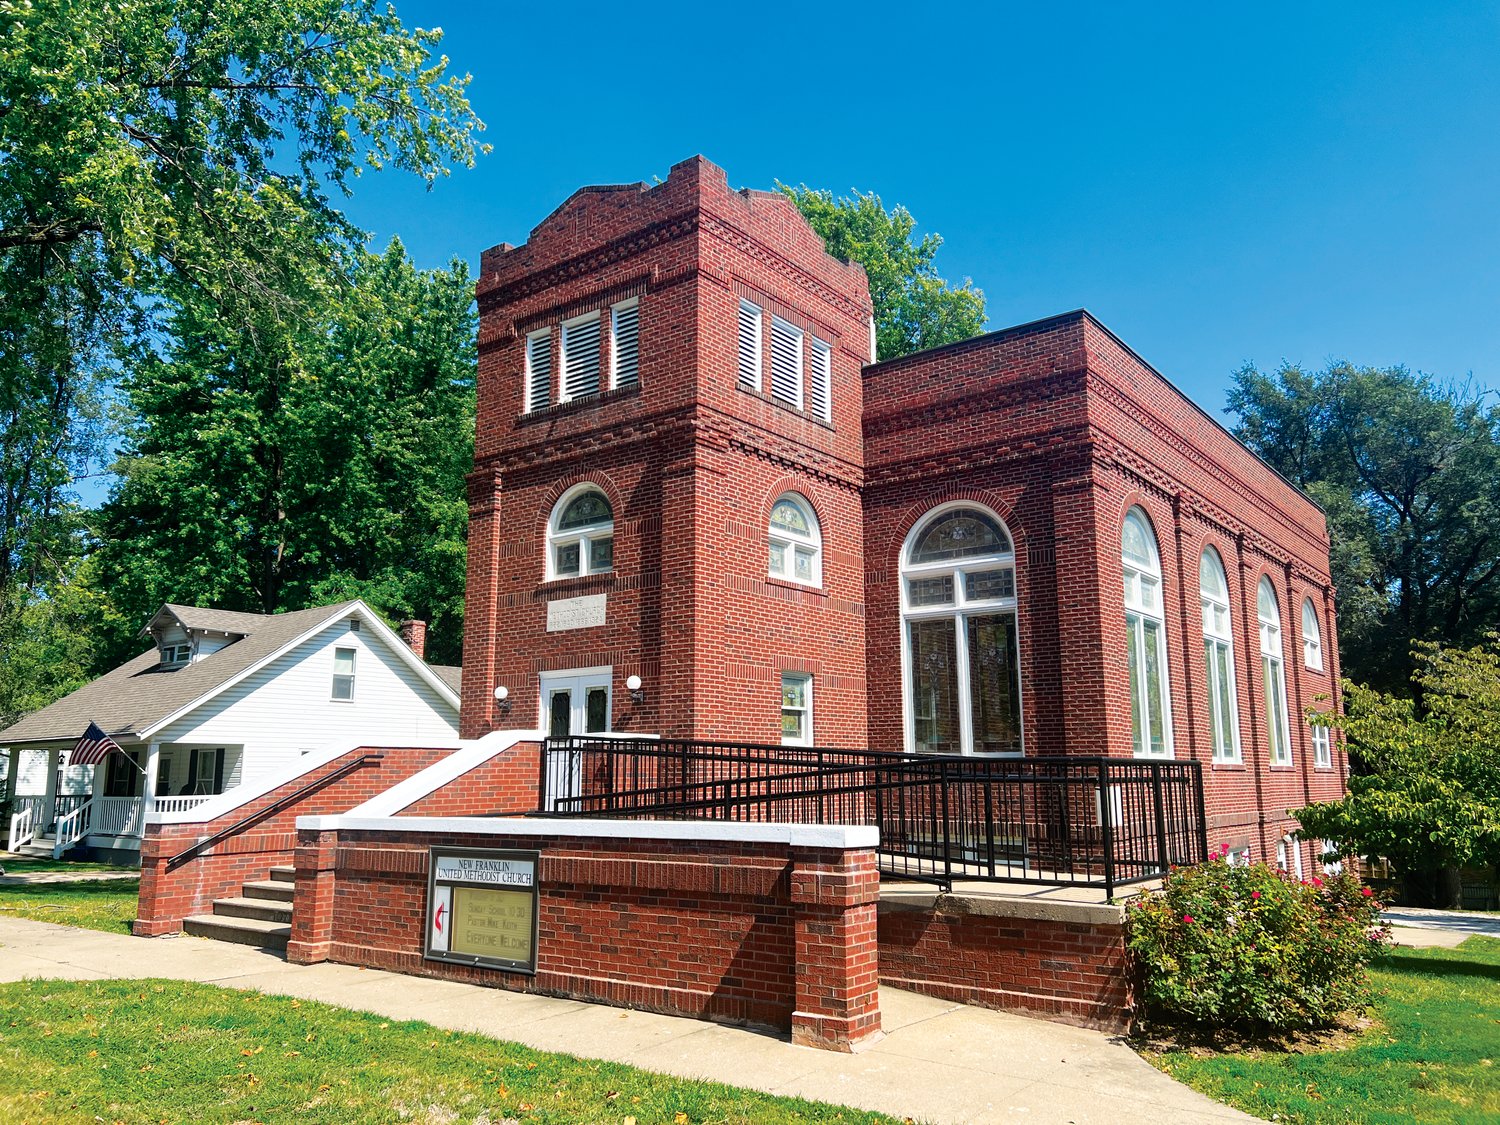 Construction for the current New Franklin United Methodist Church building began on September 11, 1924, at a cost of $25,000. The church was dedicated on April 18, 1925.